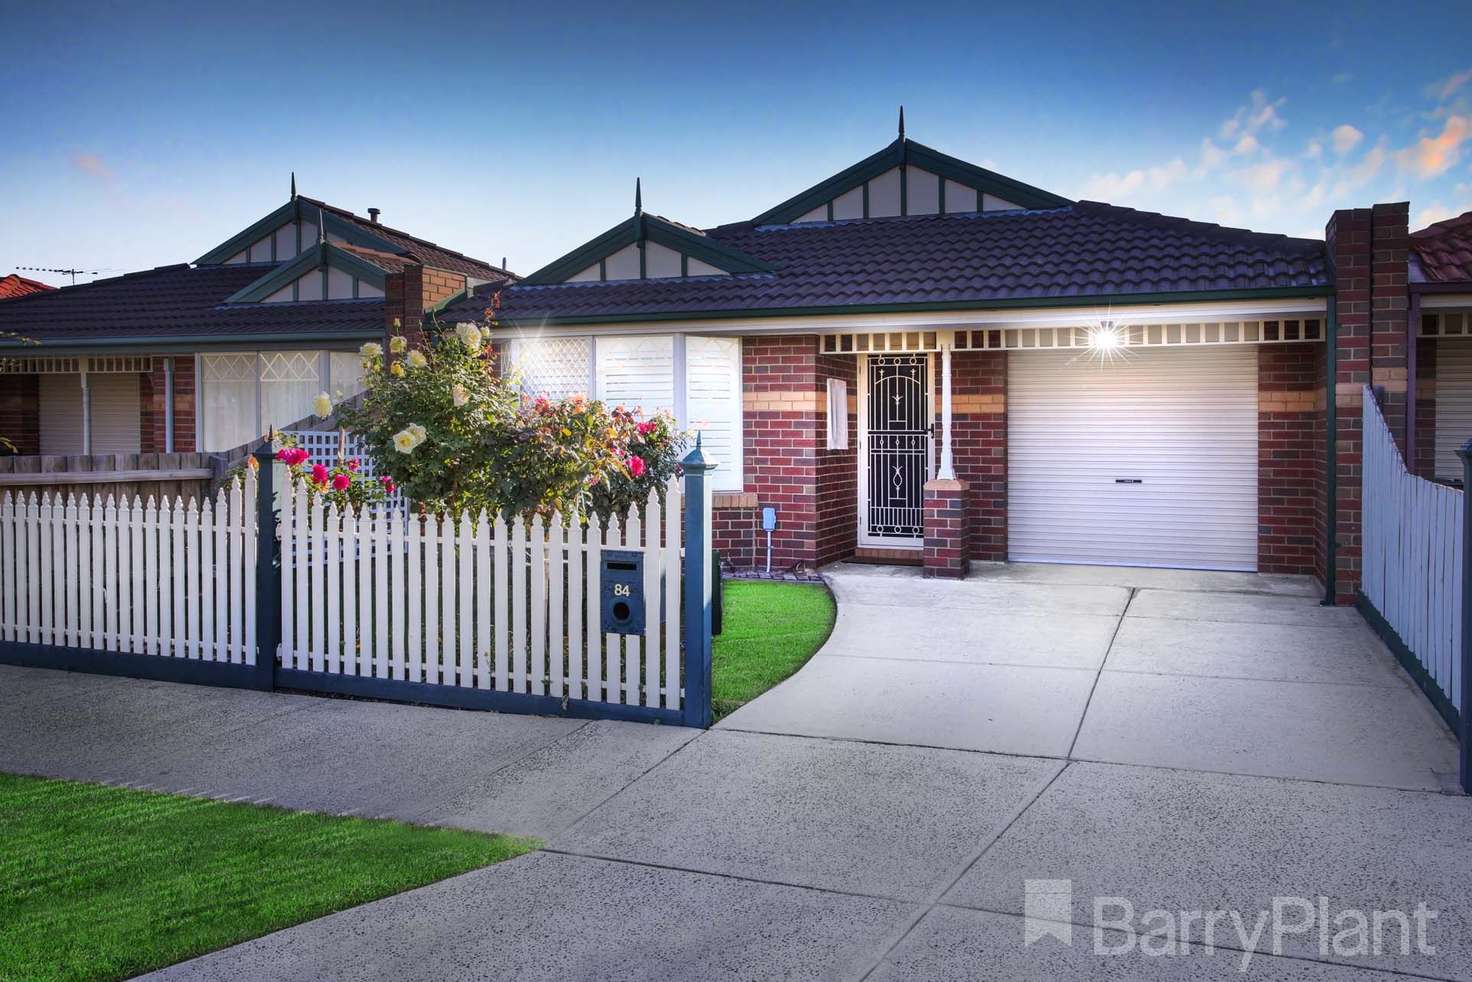 Main view of Homely house listing, 84 Gresham Way, Sunshine West VIC 3020